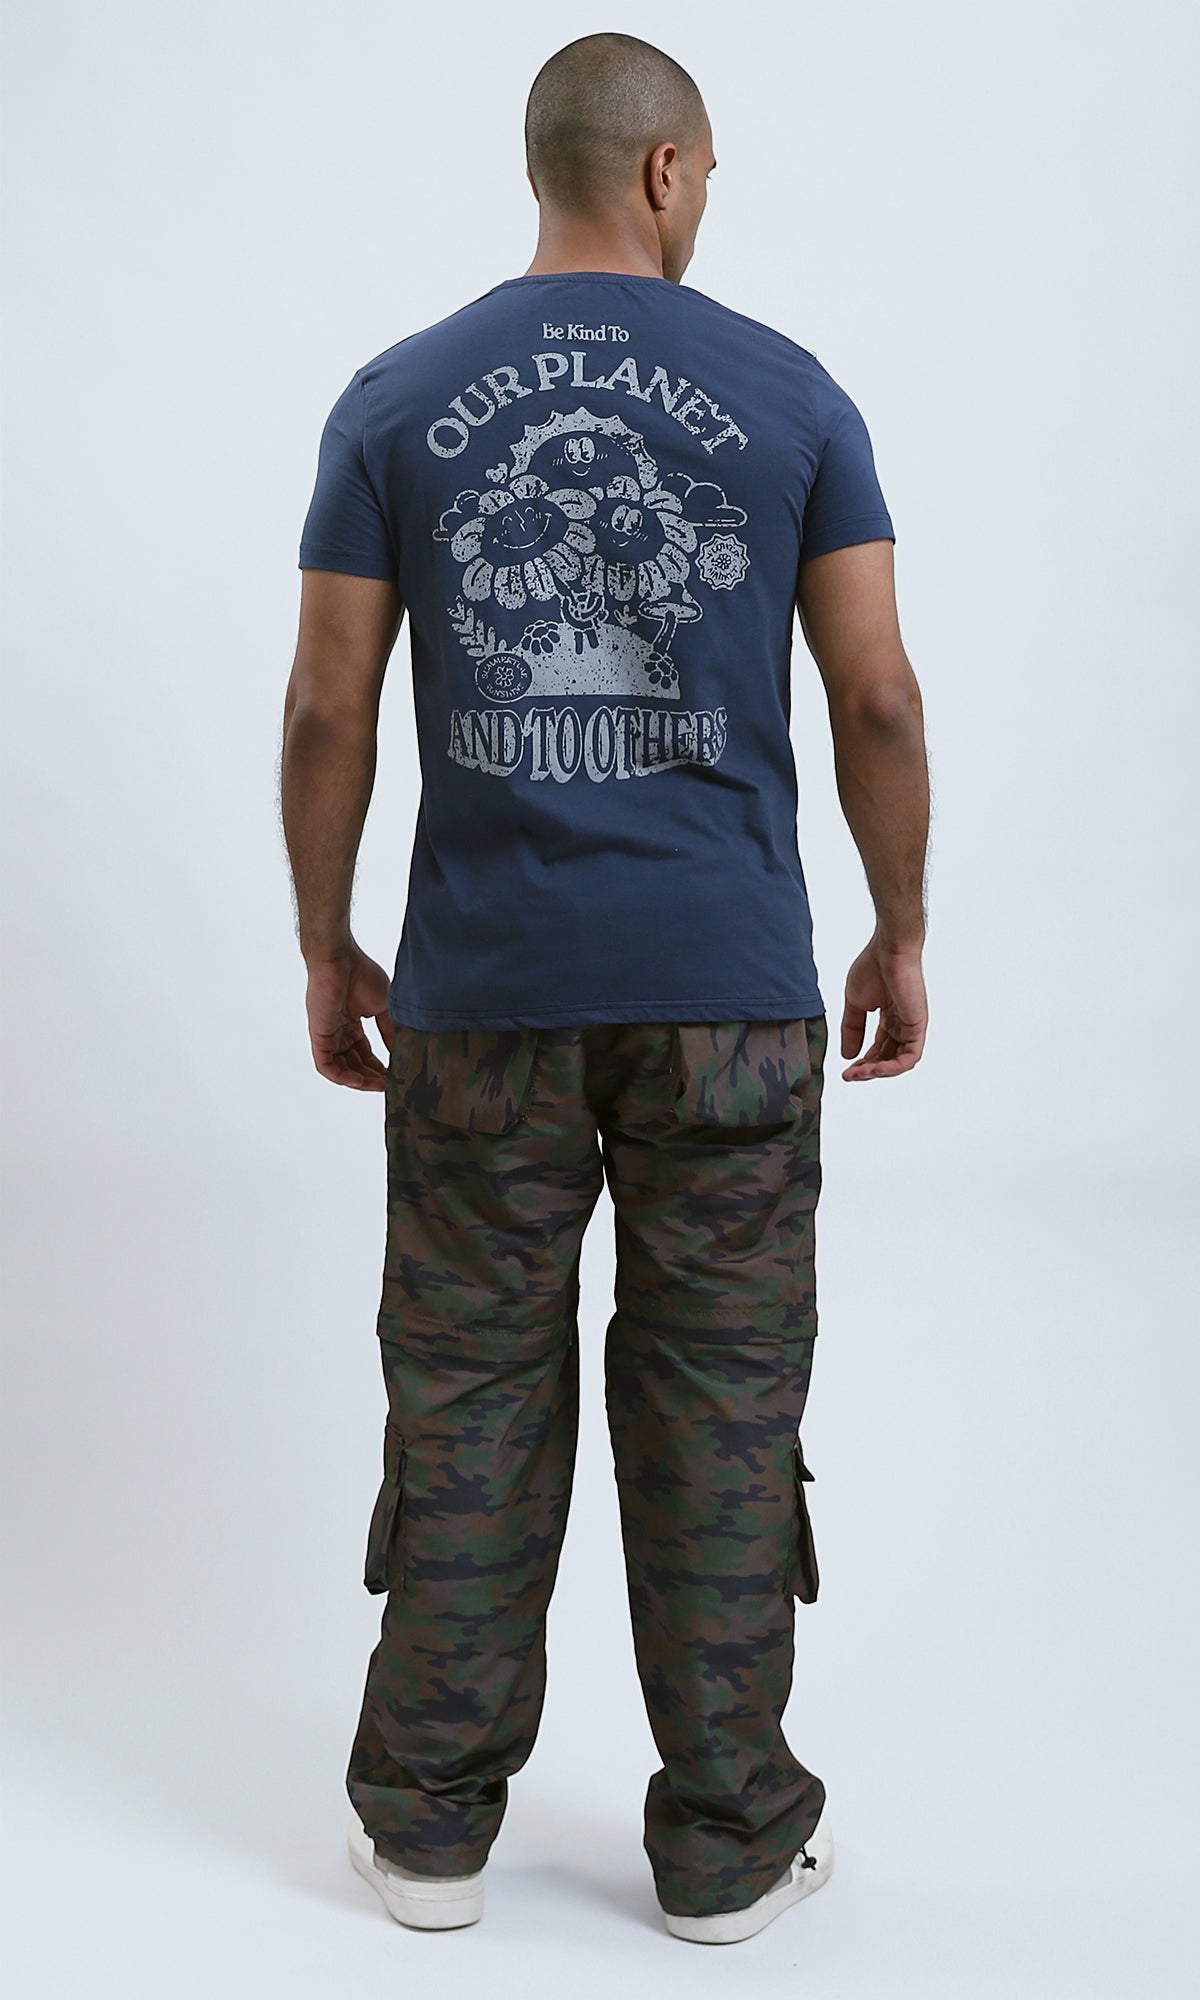 O179009 Navy Blue Printed "Our Planet" Short Sleeves